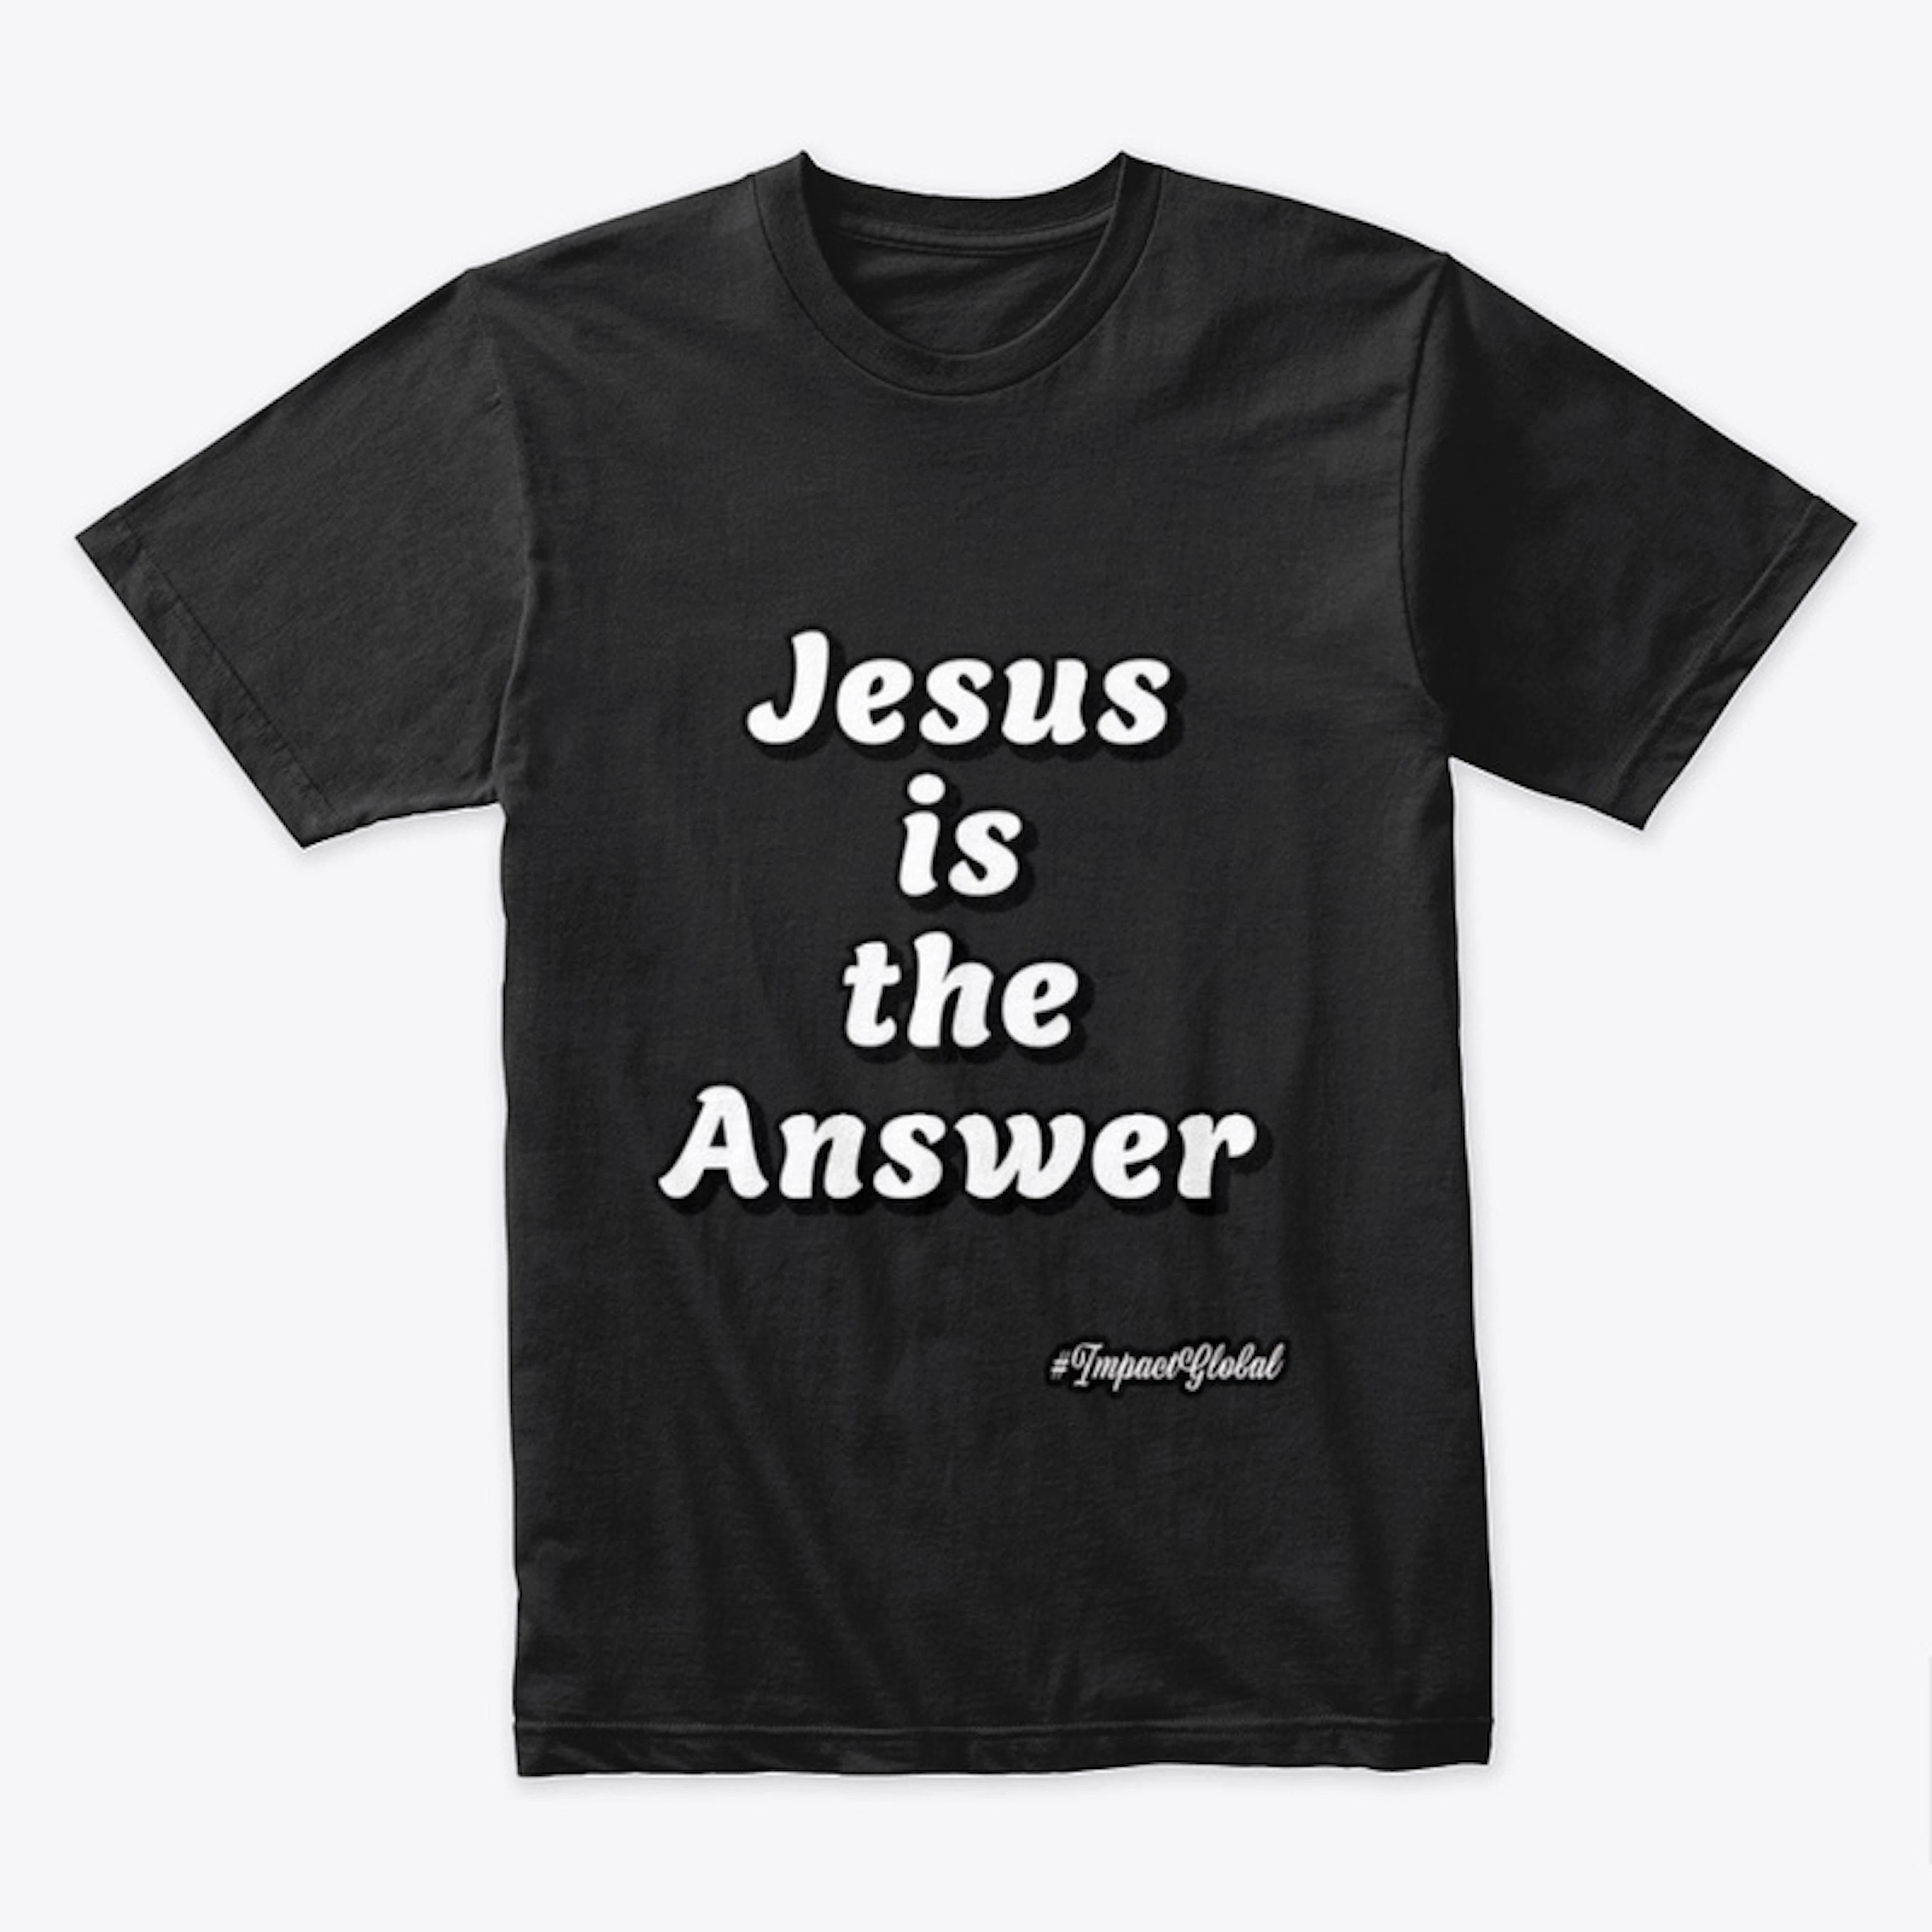 Jesus is the Answer